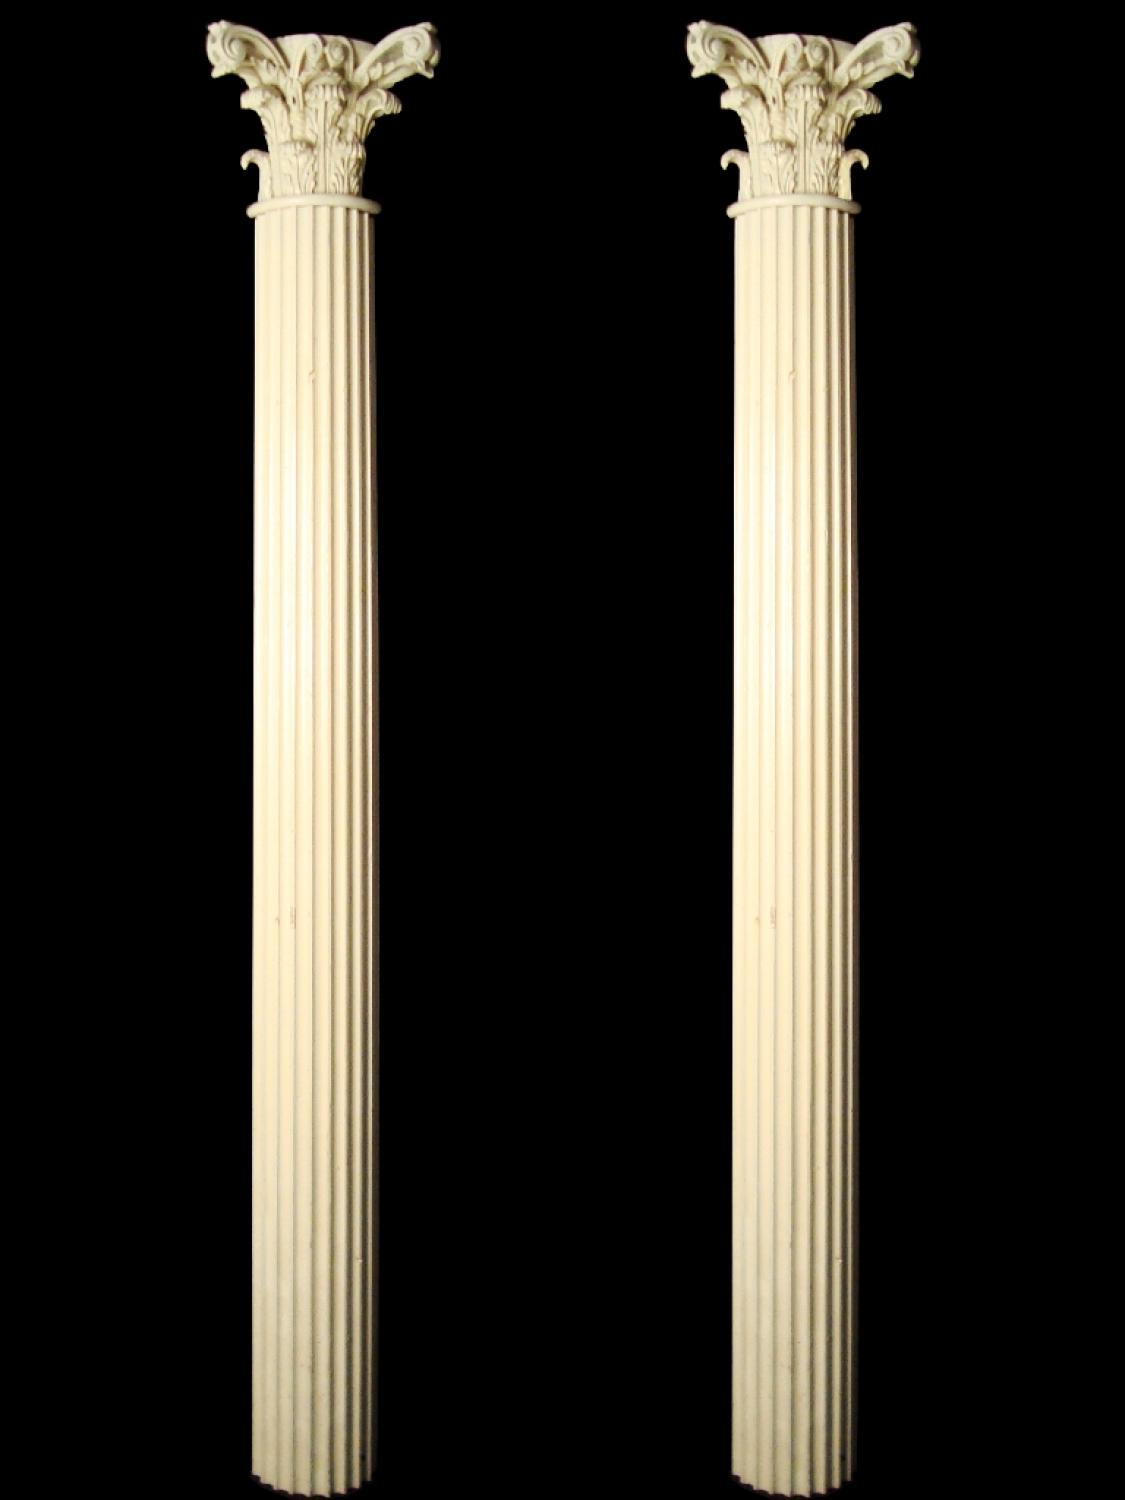 A pair of white painted carved wood pilasters